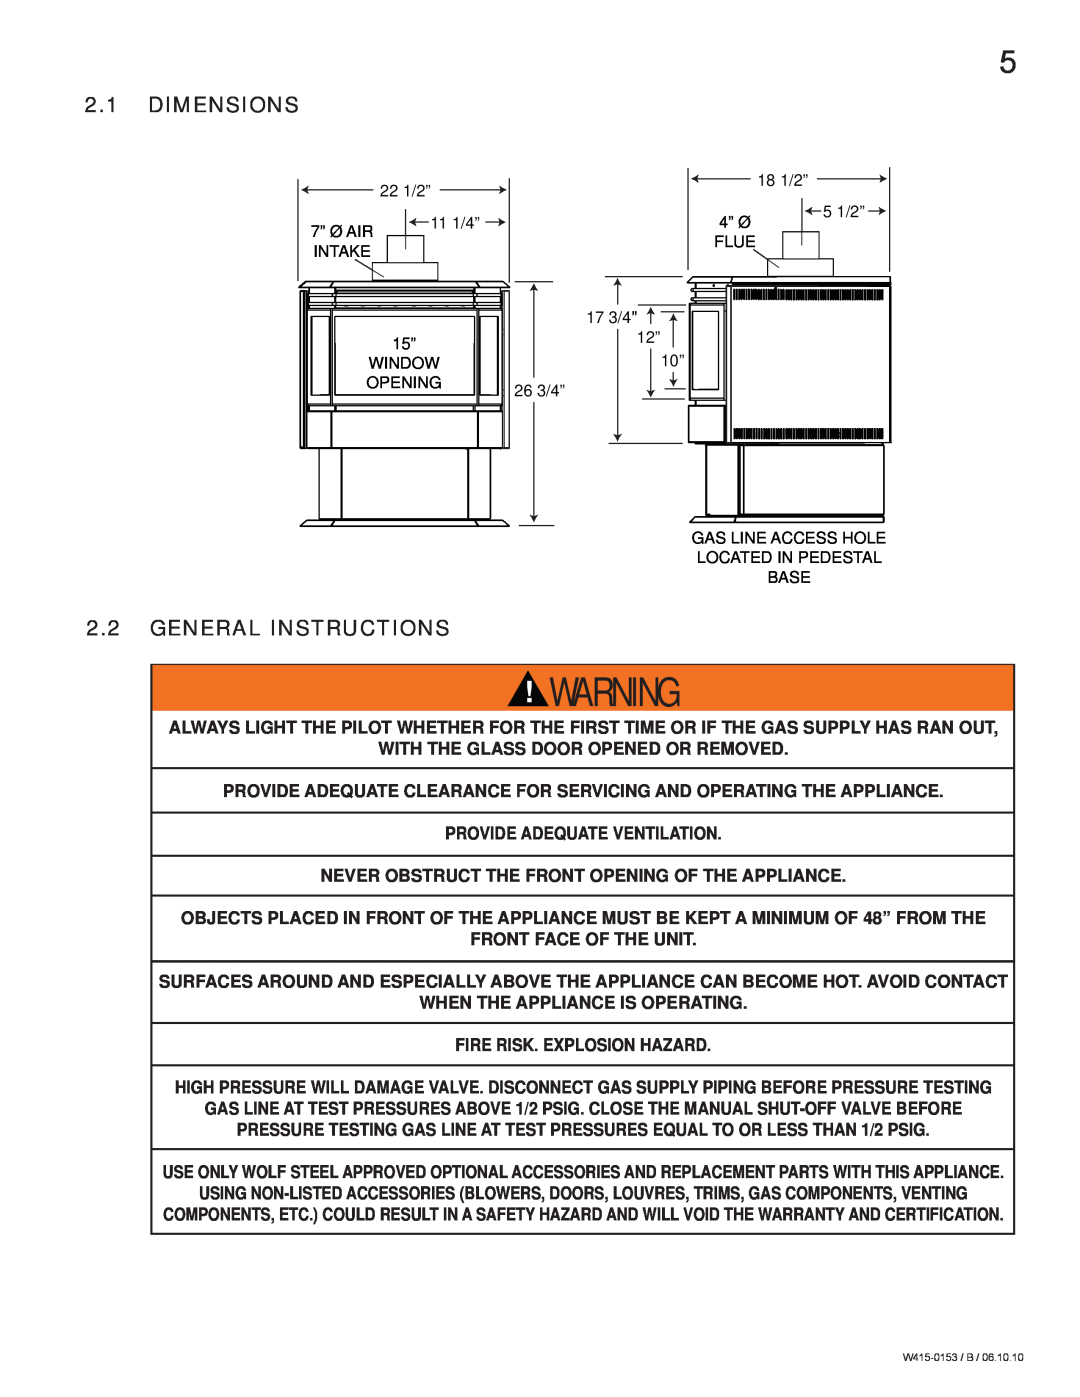 Napoleon Fireplaces GDS28P manual 2.1DIMENSIONS, 2.2GENERAL INSTRUCTIONS 